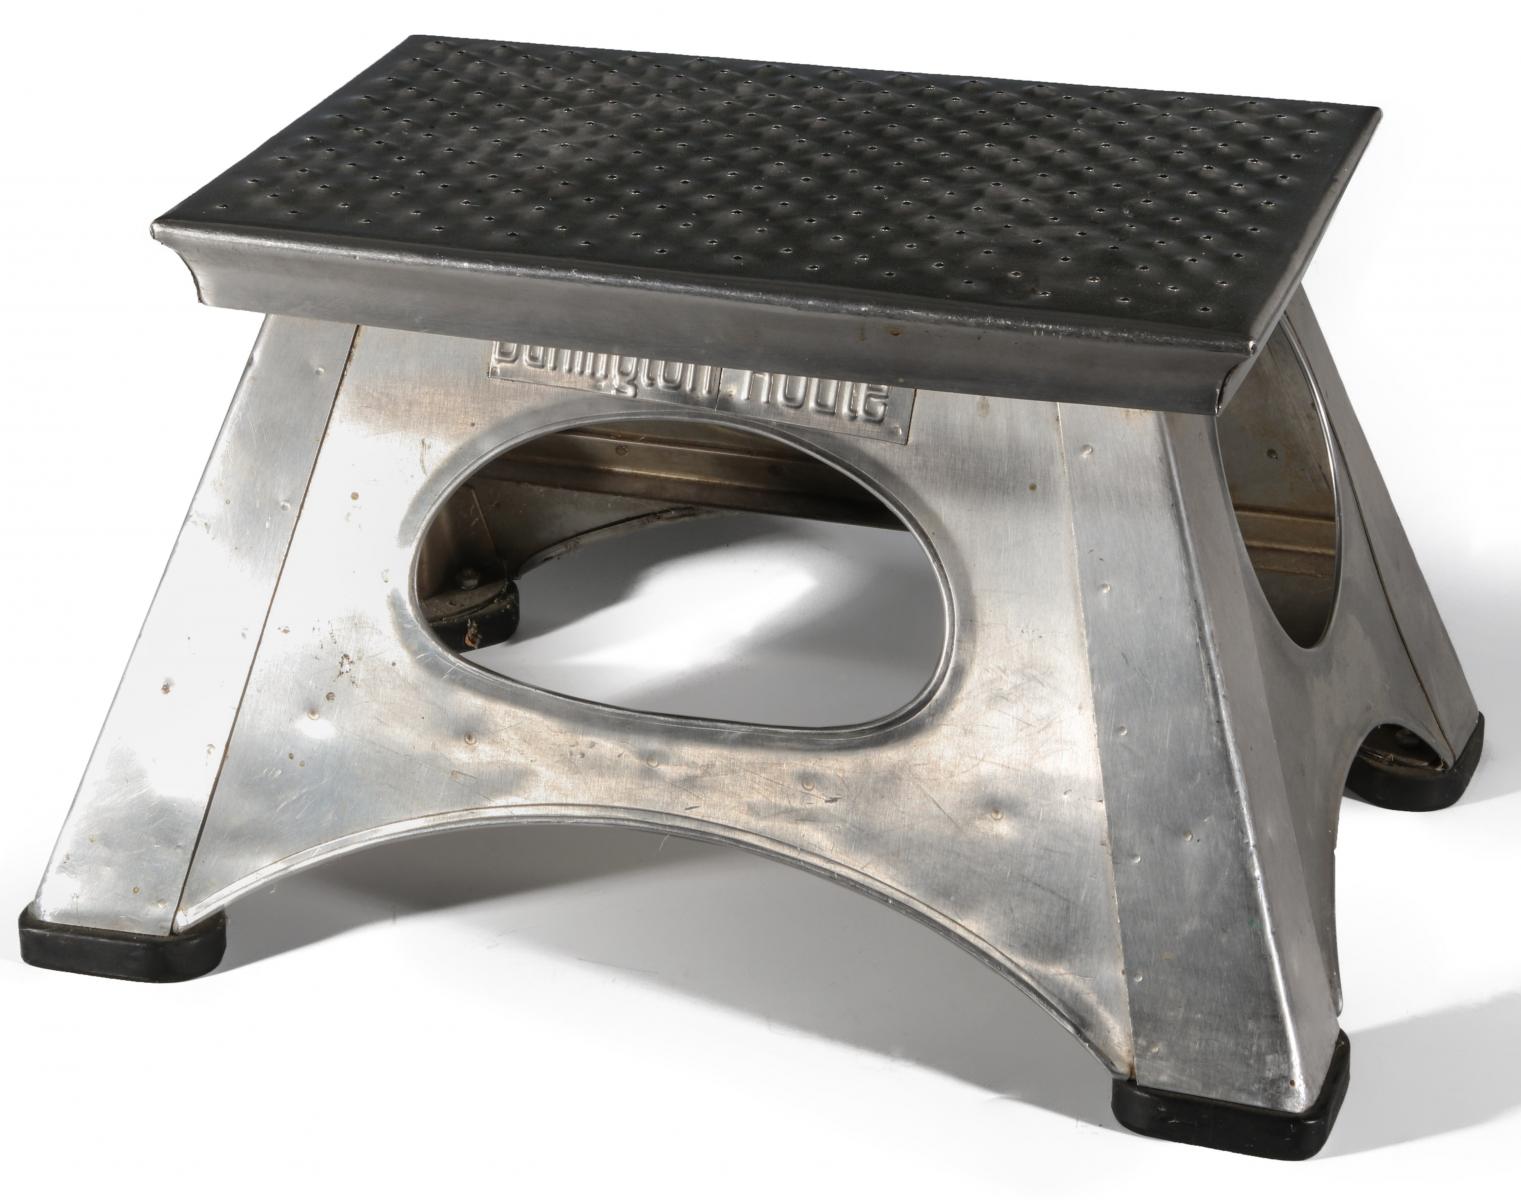 A GOOD STAINLESS STEEL BURLINGTON ROUTE STEP STOOL